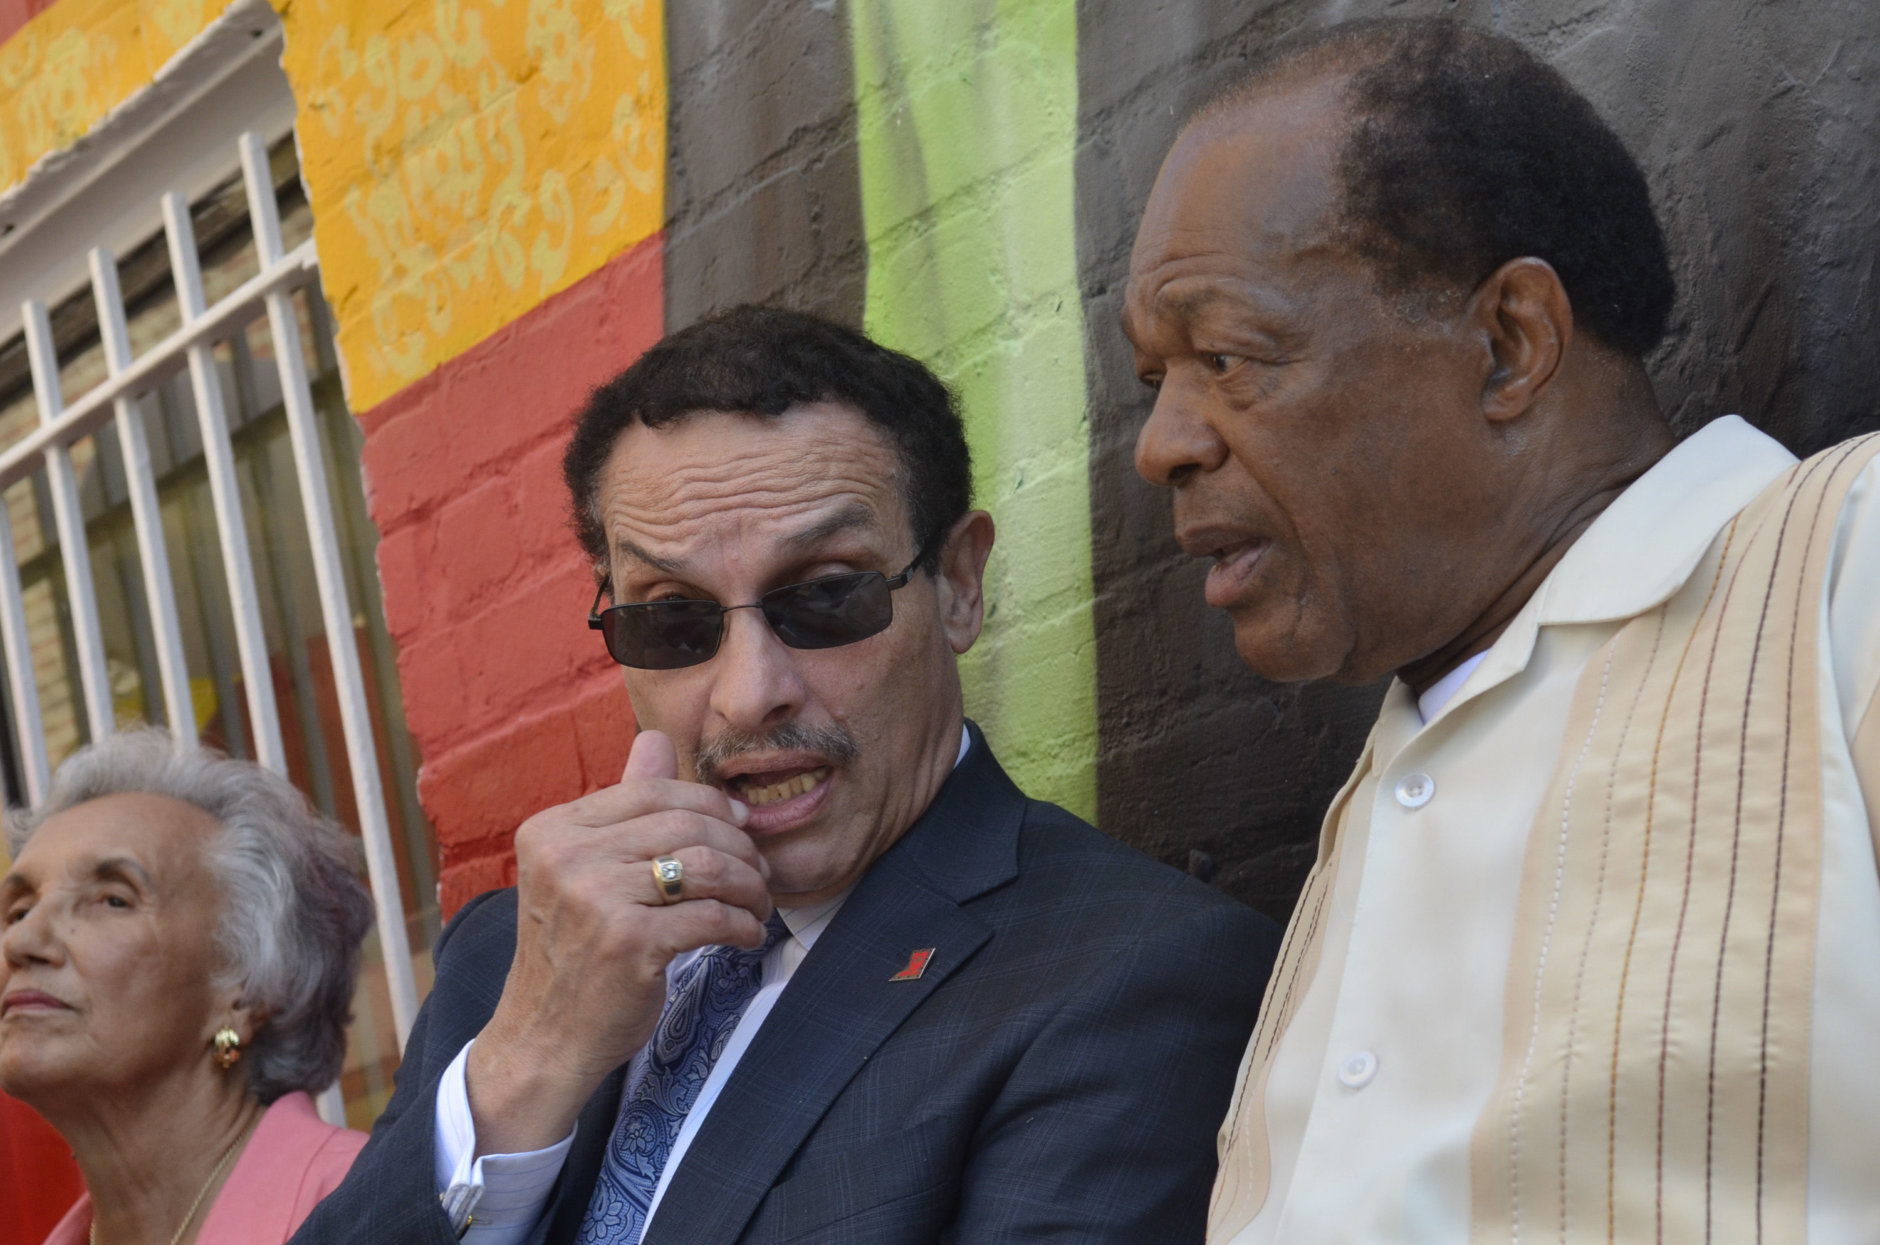 WASHINGTON, DC - AUGUST 22: Vincent Gray and Marion Barry speak during the 55th Anniversary of Ben's Chili Bowl on August 22, 2013 in Washington, DC. (Photo by Kris Connor/Getty Images)